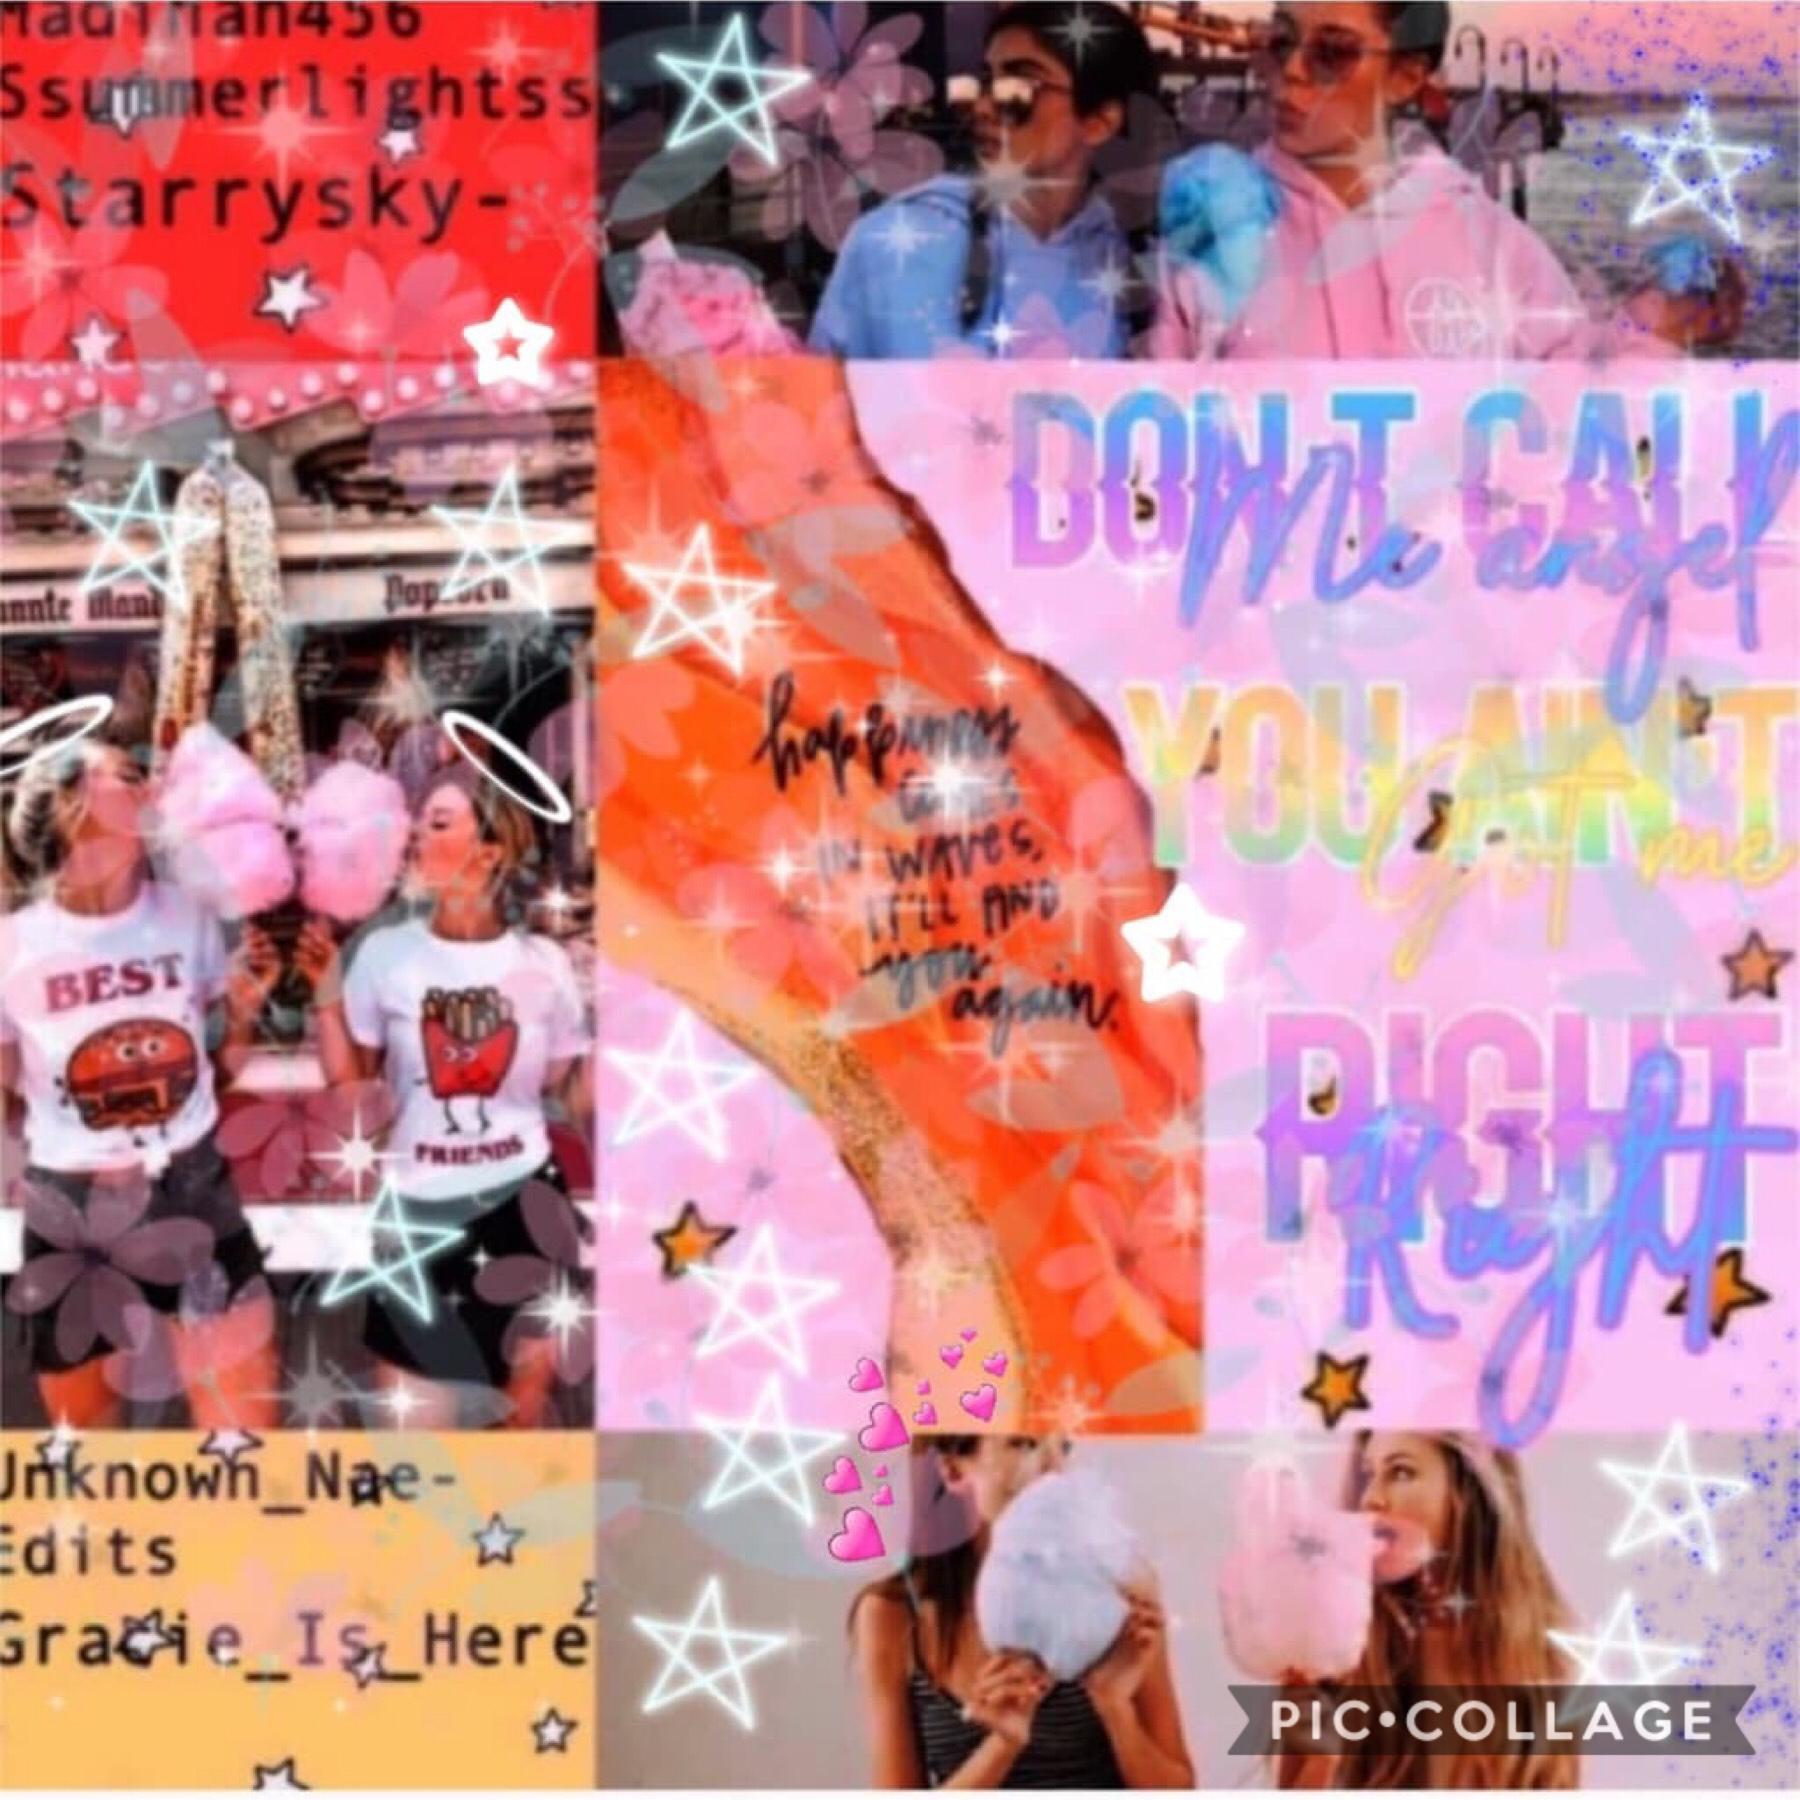 🎀BESTIE🎀 COLLAB WITH GRACIE_IS_HERE, STARRYSKY-, UNKNOWN-NAE_EDITS, AND MADIHAH456❣️❣️❣️